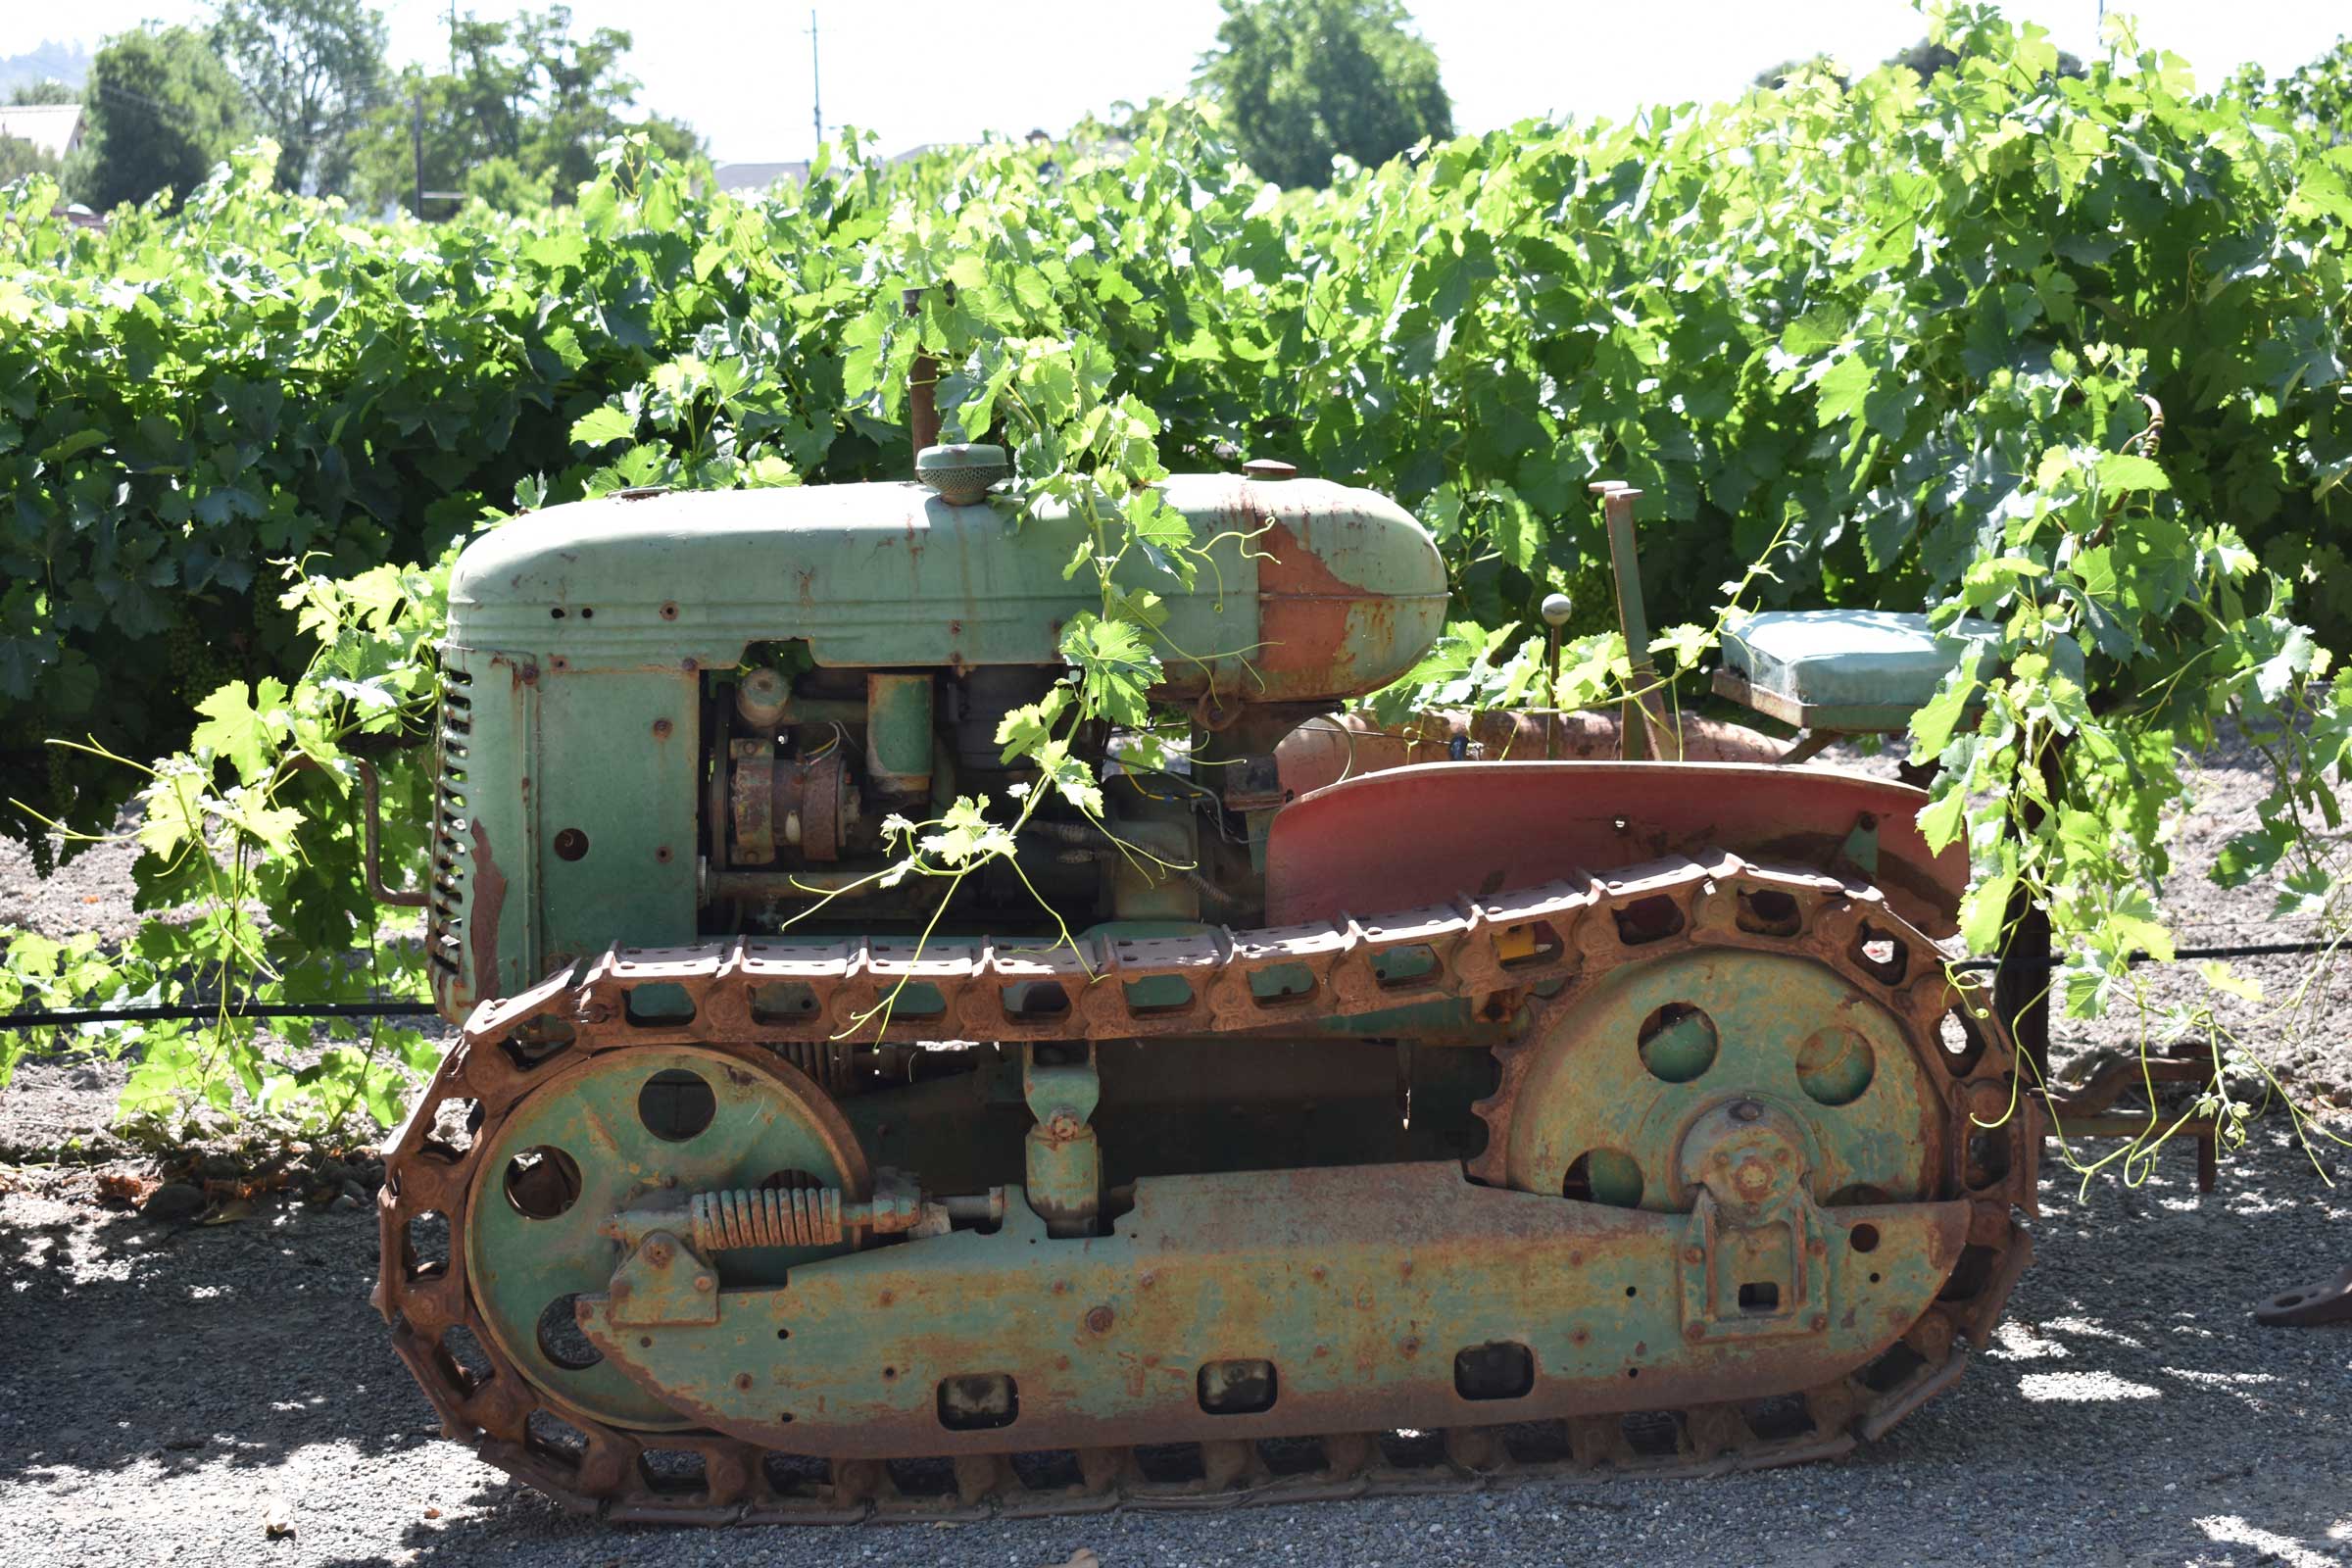 vintage green and red tractor set among vineyard canopy